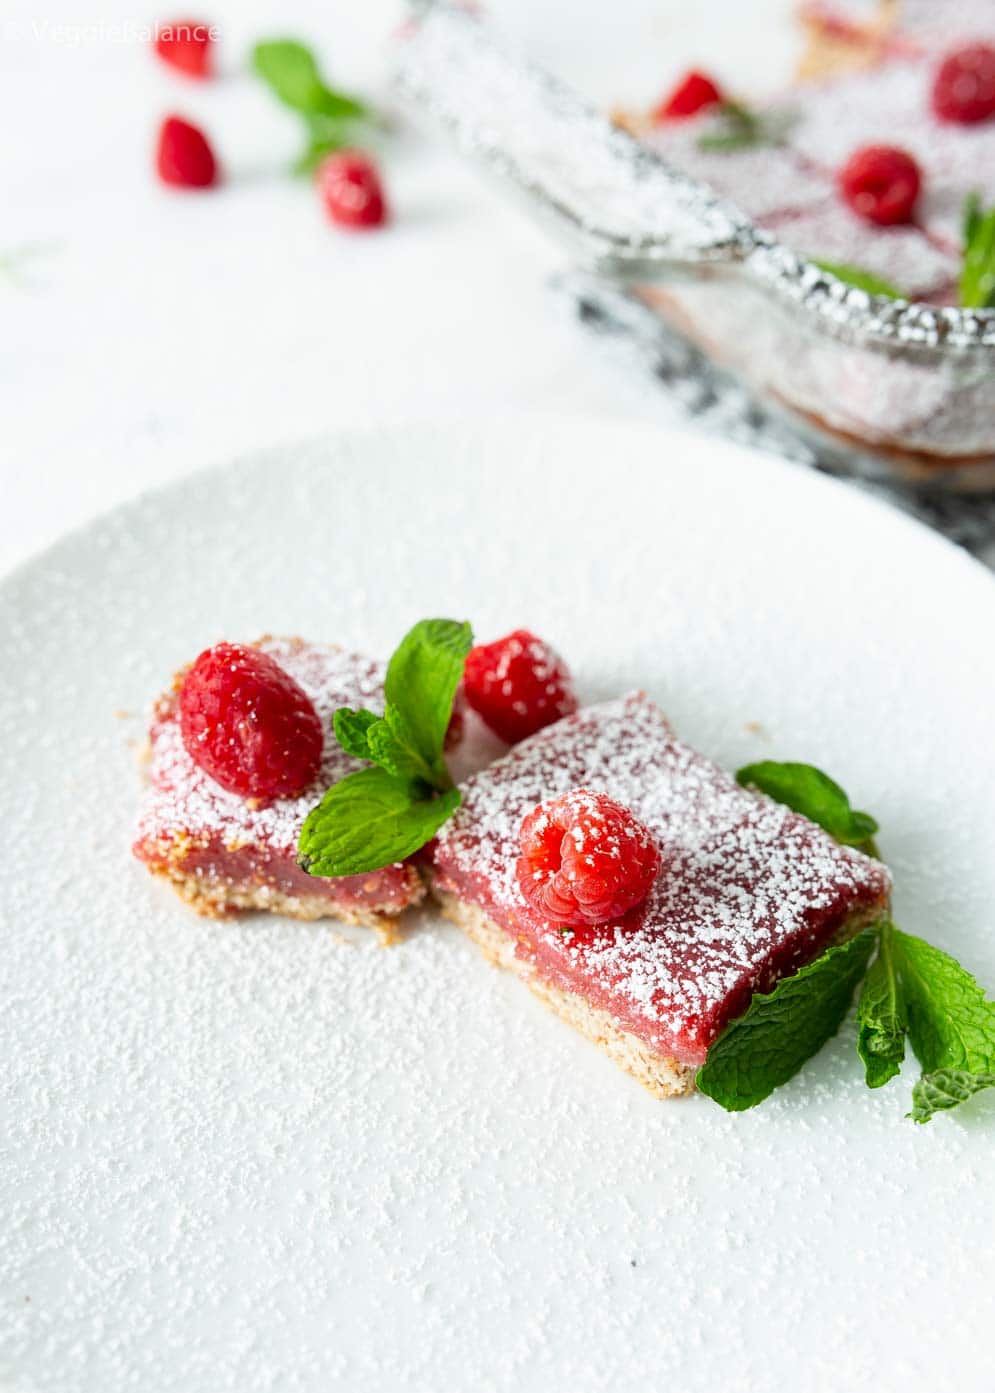 Two Vegan Raspberry Lemon Bars with fresh raspberries and mint leaves decorated around on a small plate